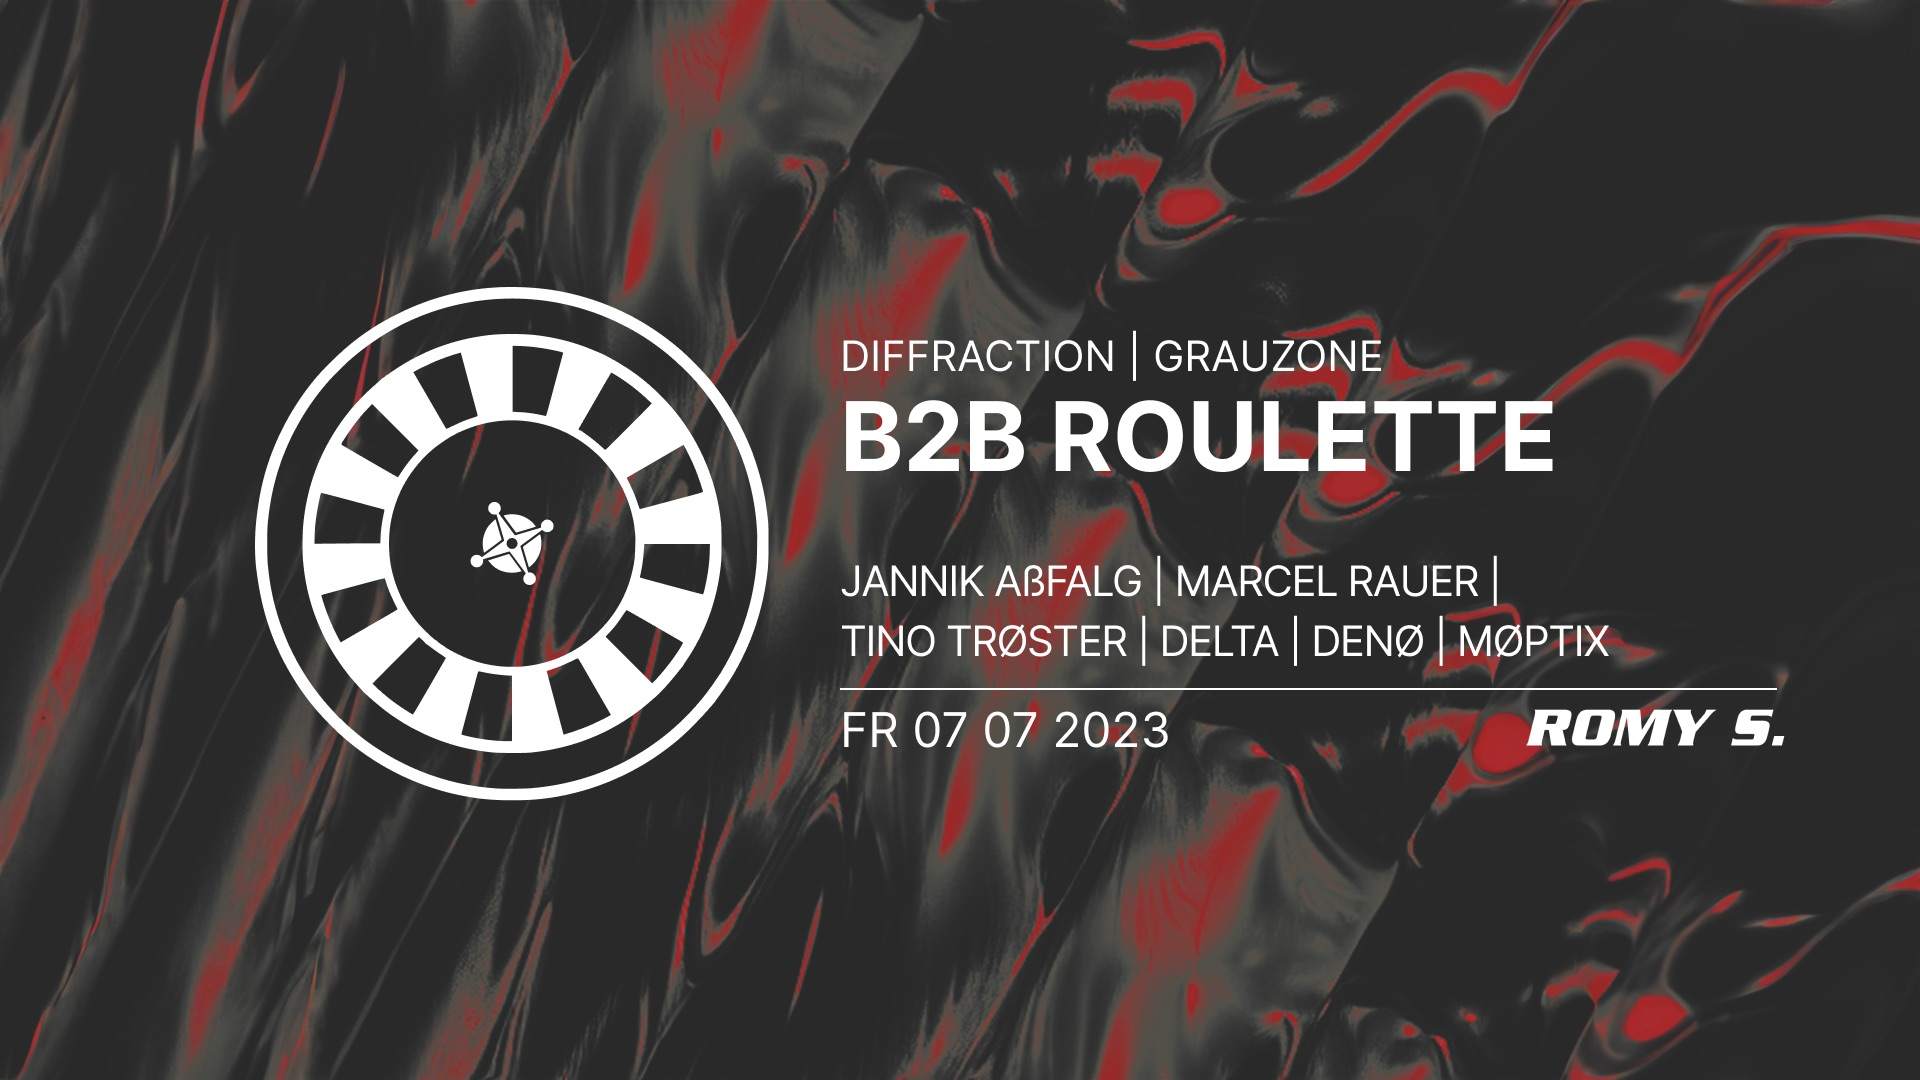 B2B ROULETTE with DIFFRACTION & GRAUZONE - フライヤー表